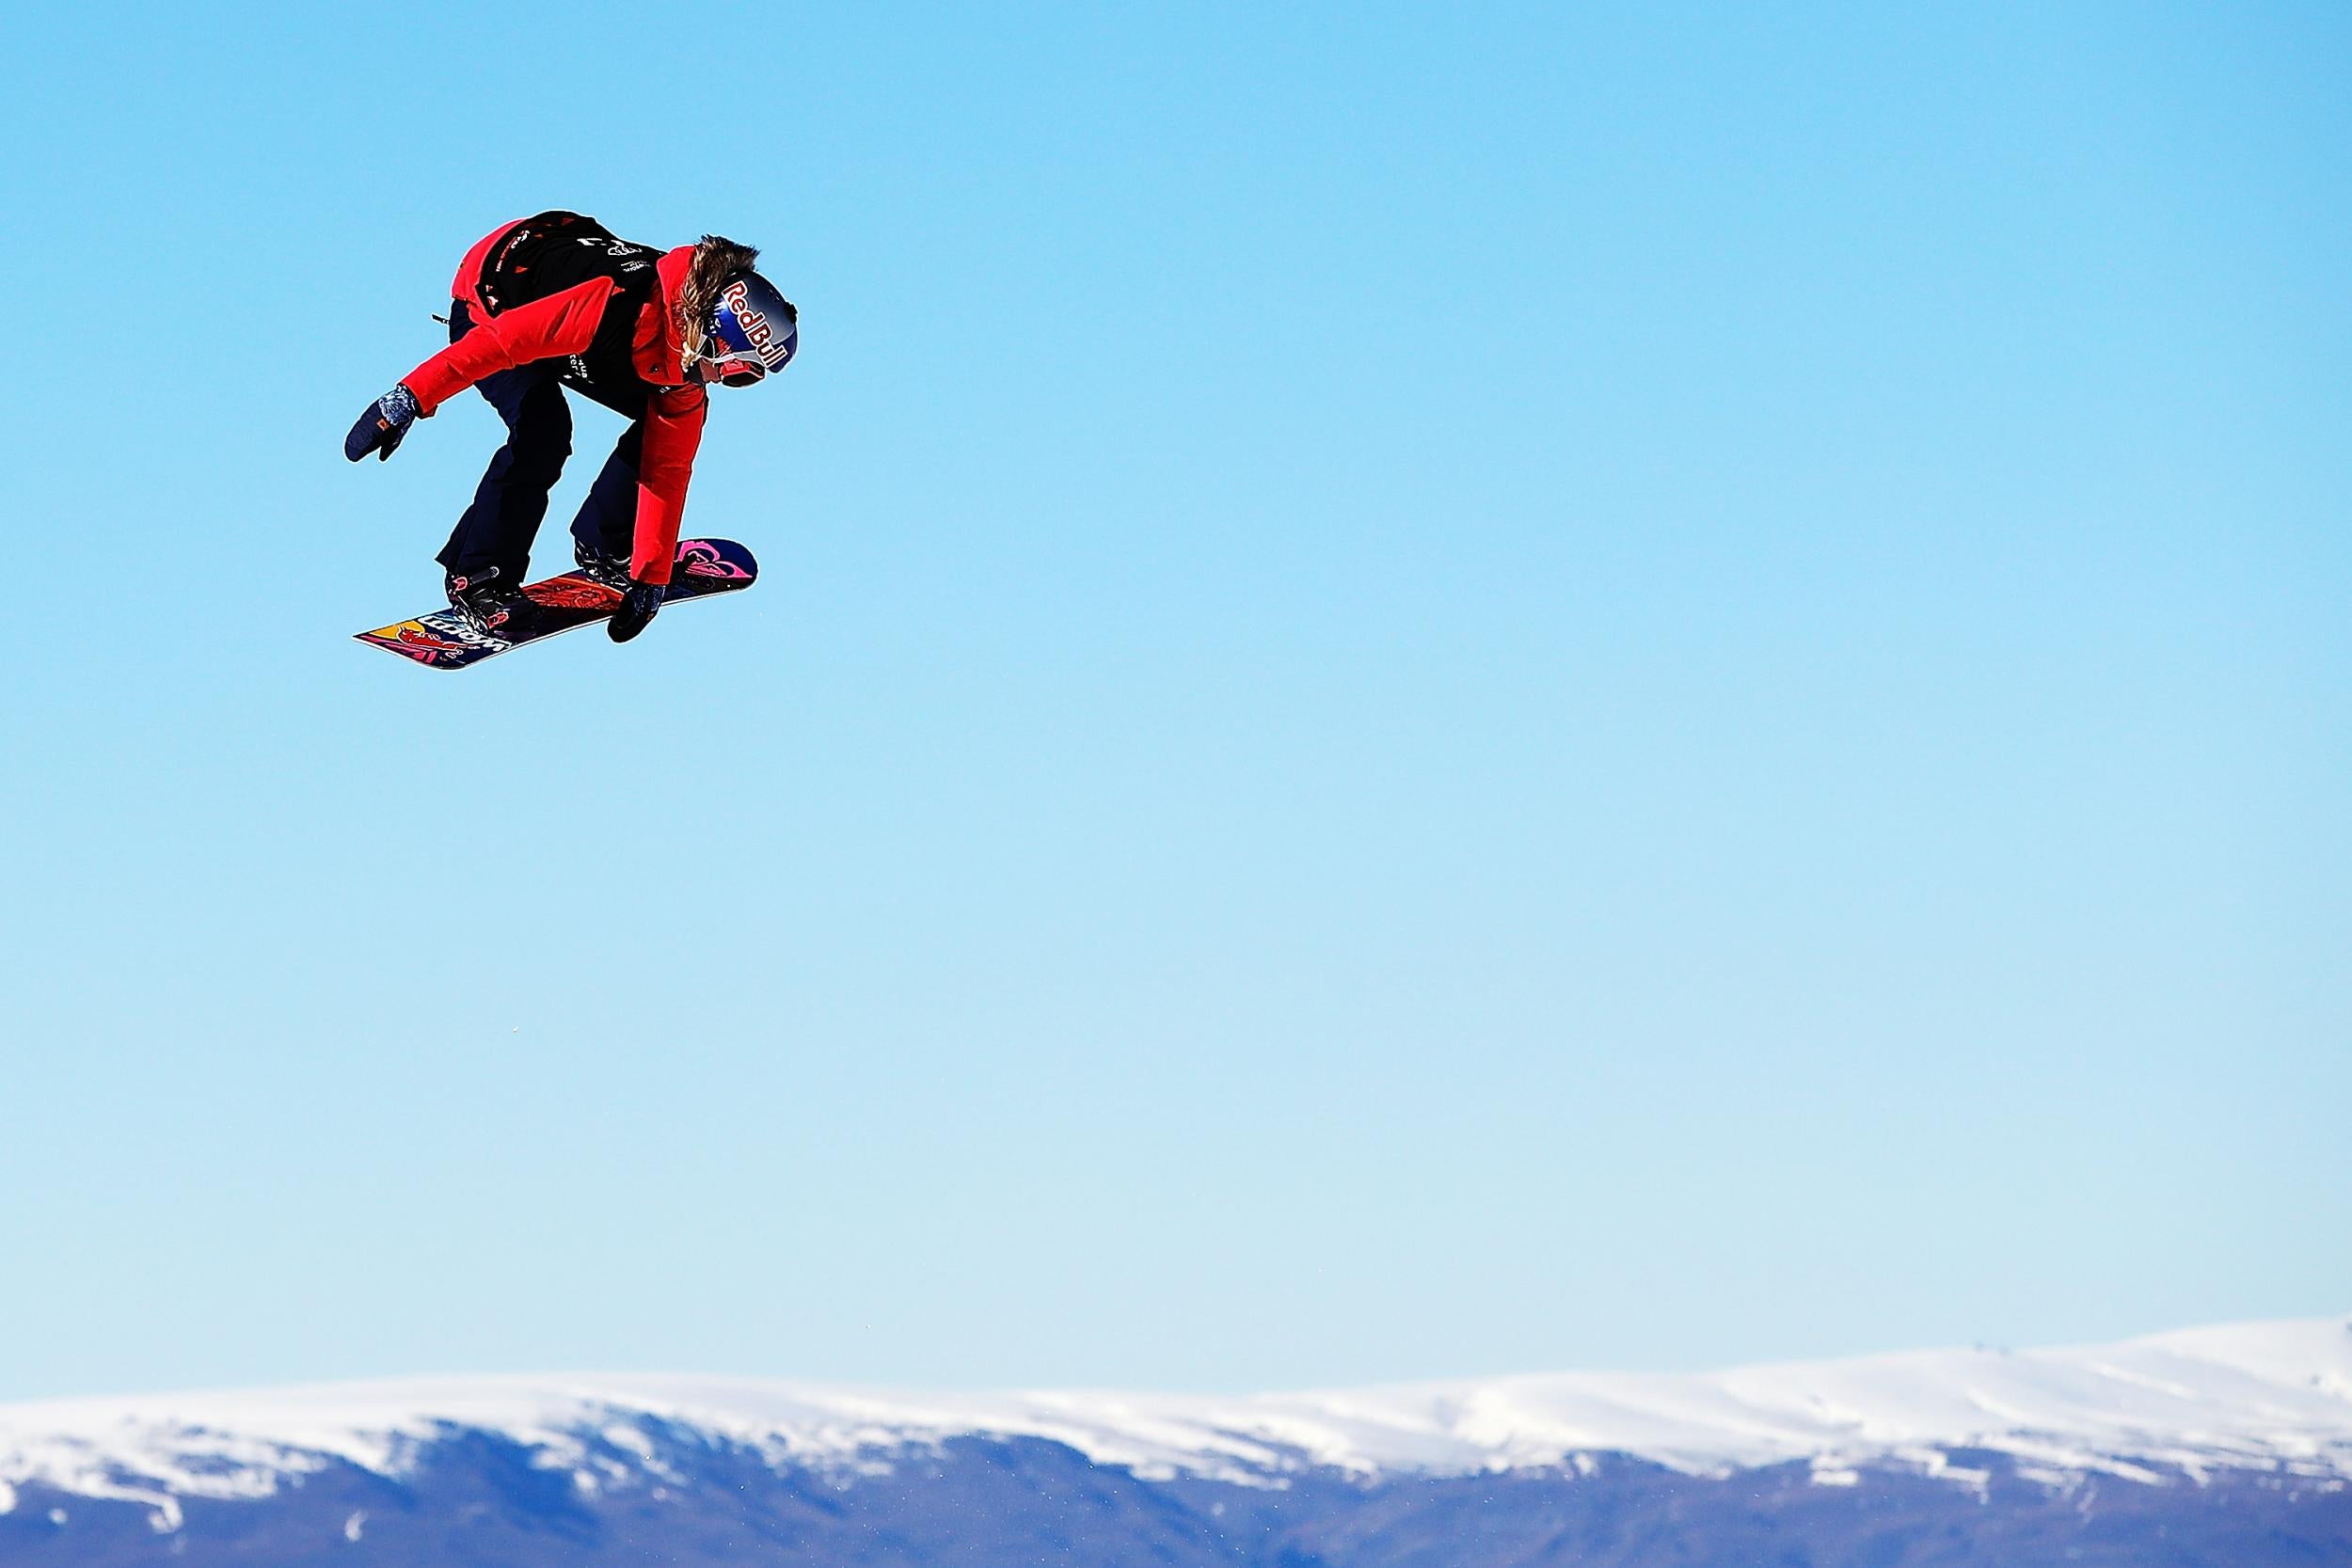 Big air is an exciting addition to the Winter Olympics